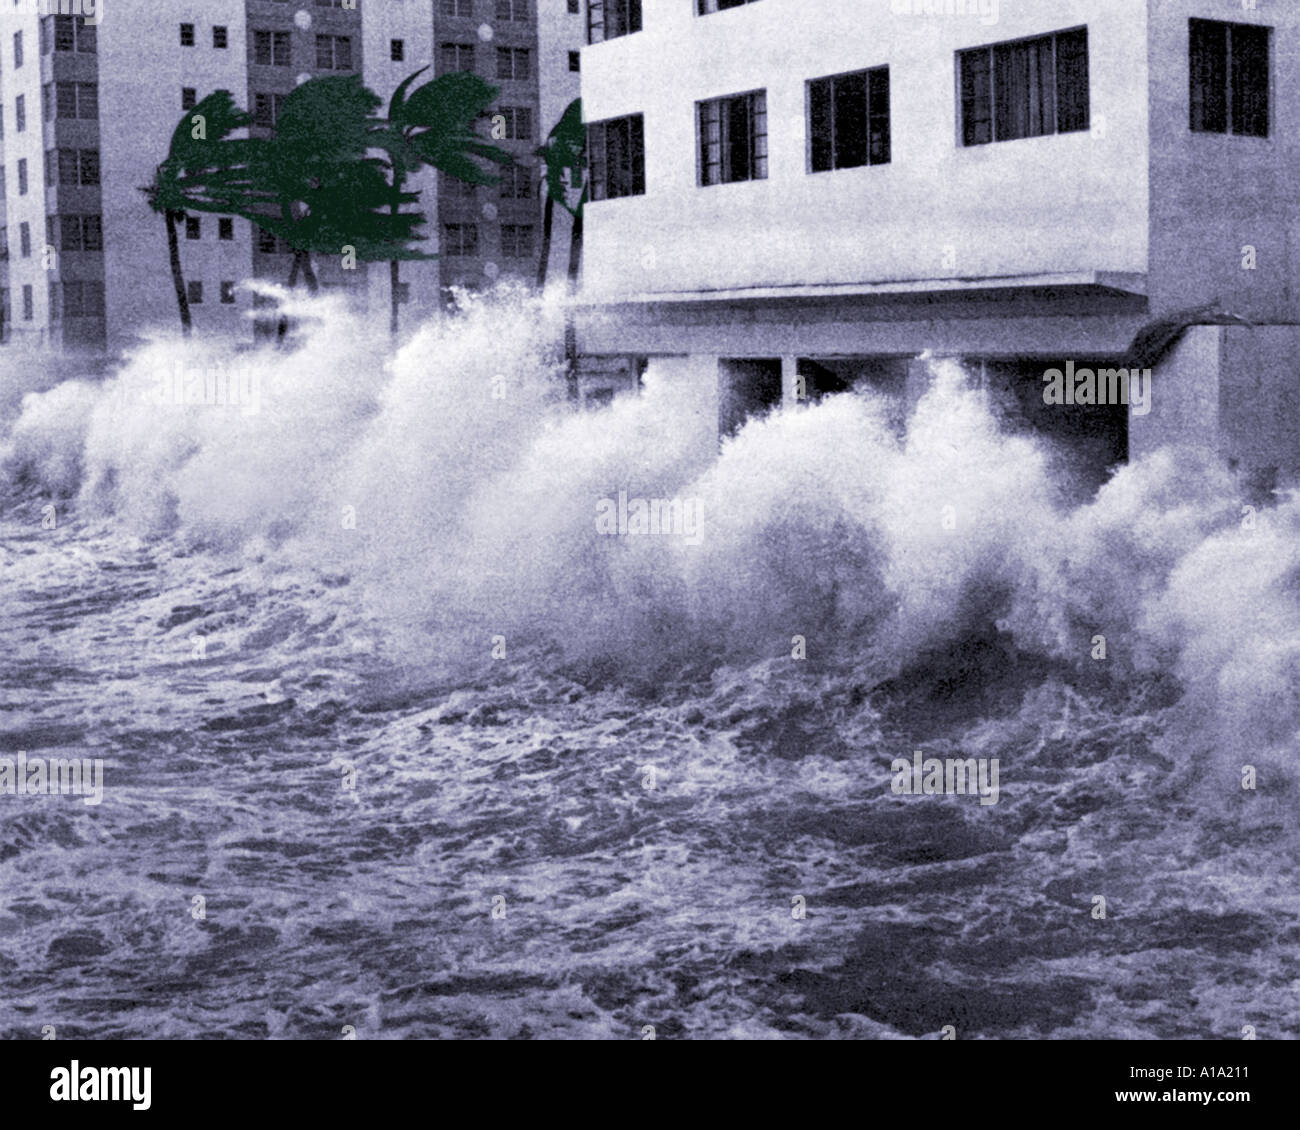 Hurricane winds and storm surge waves blow palm trees and crash into hotels on Miami Beach during Hurricane Betsy in 1965 Stock Photo